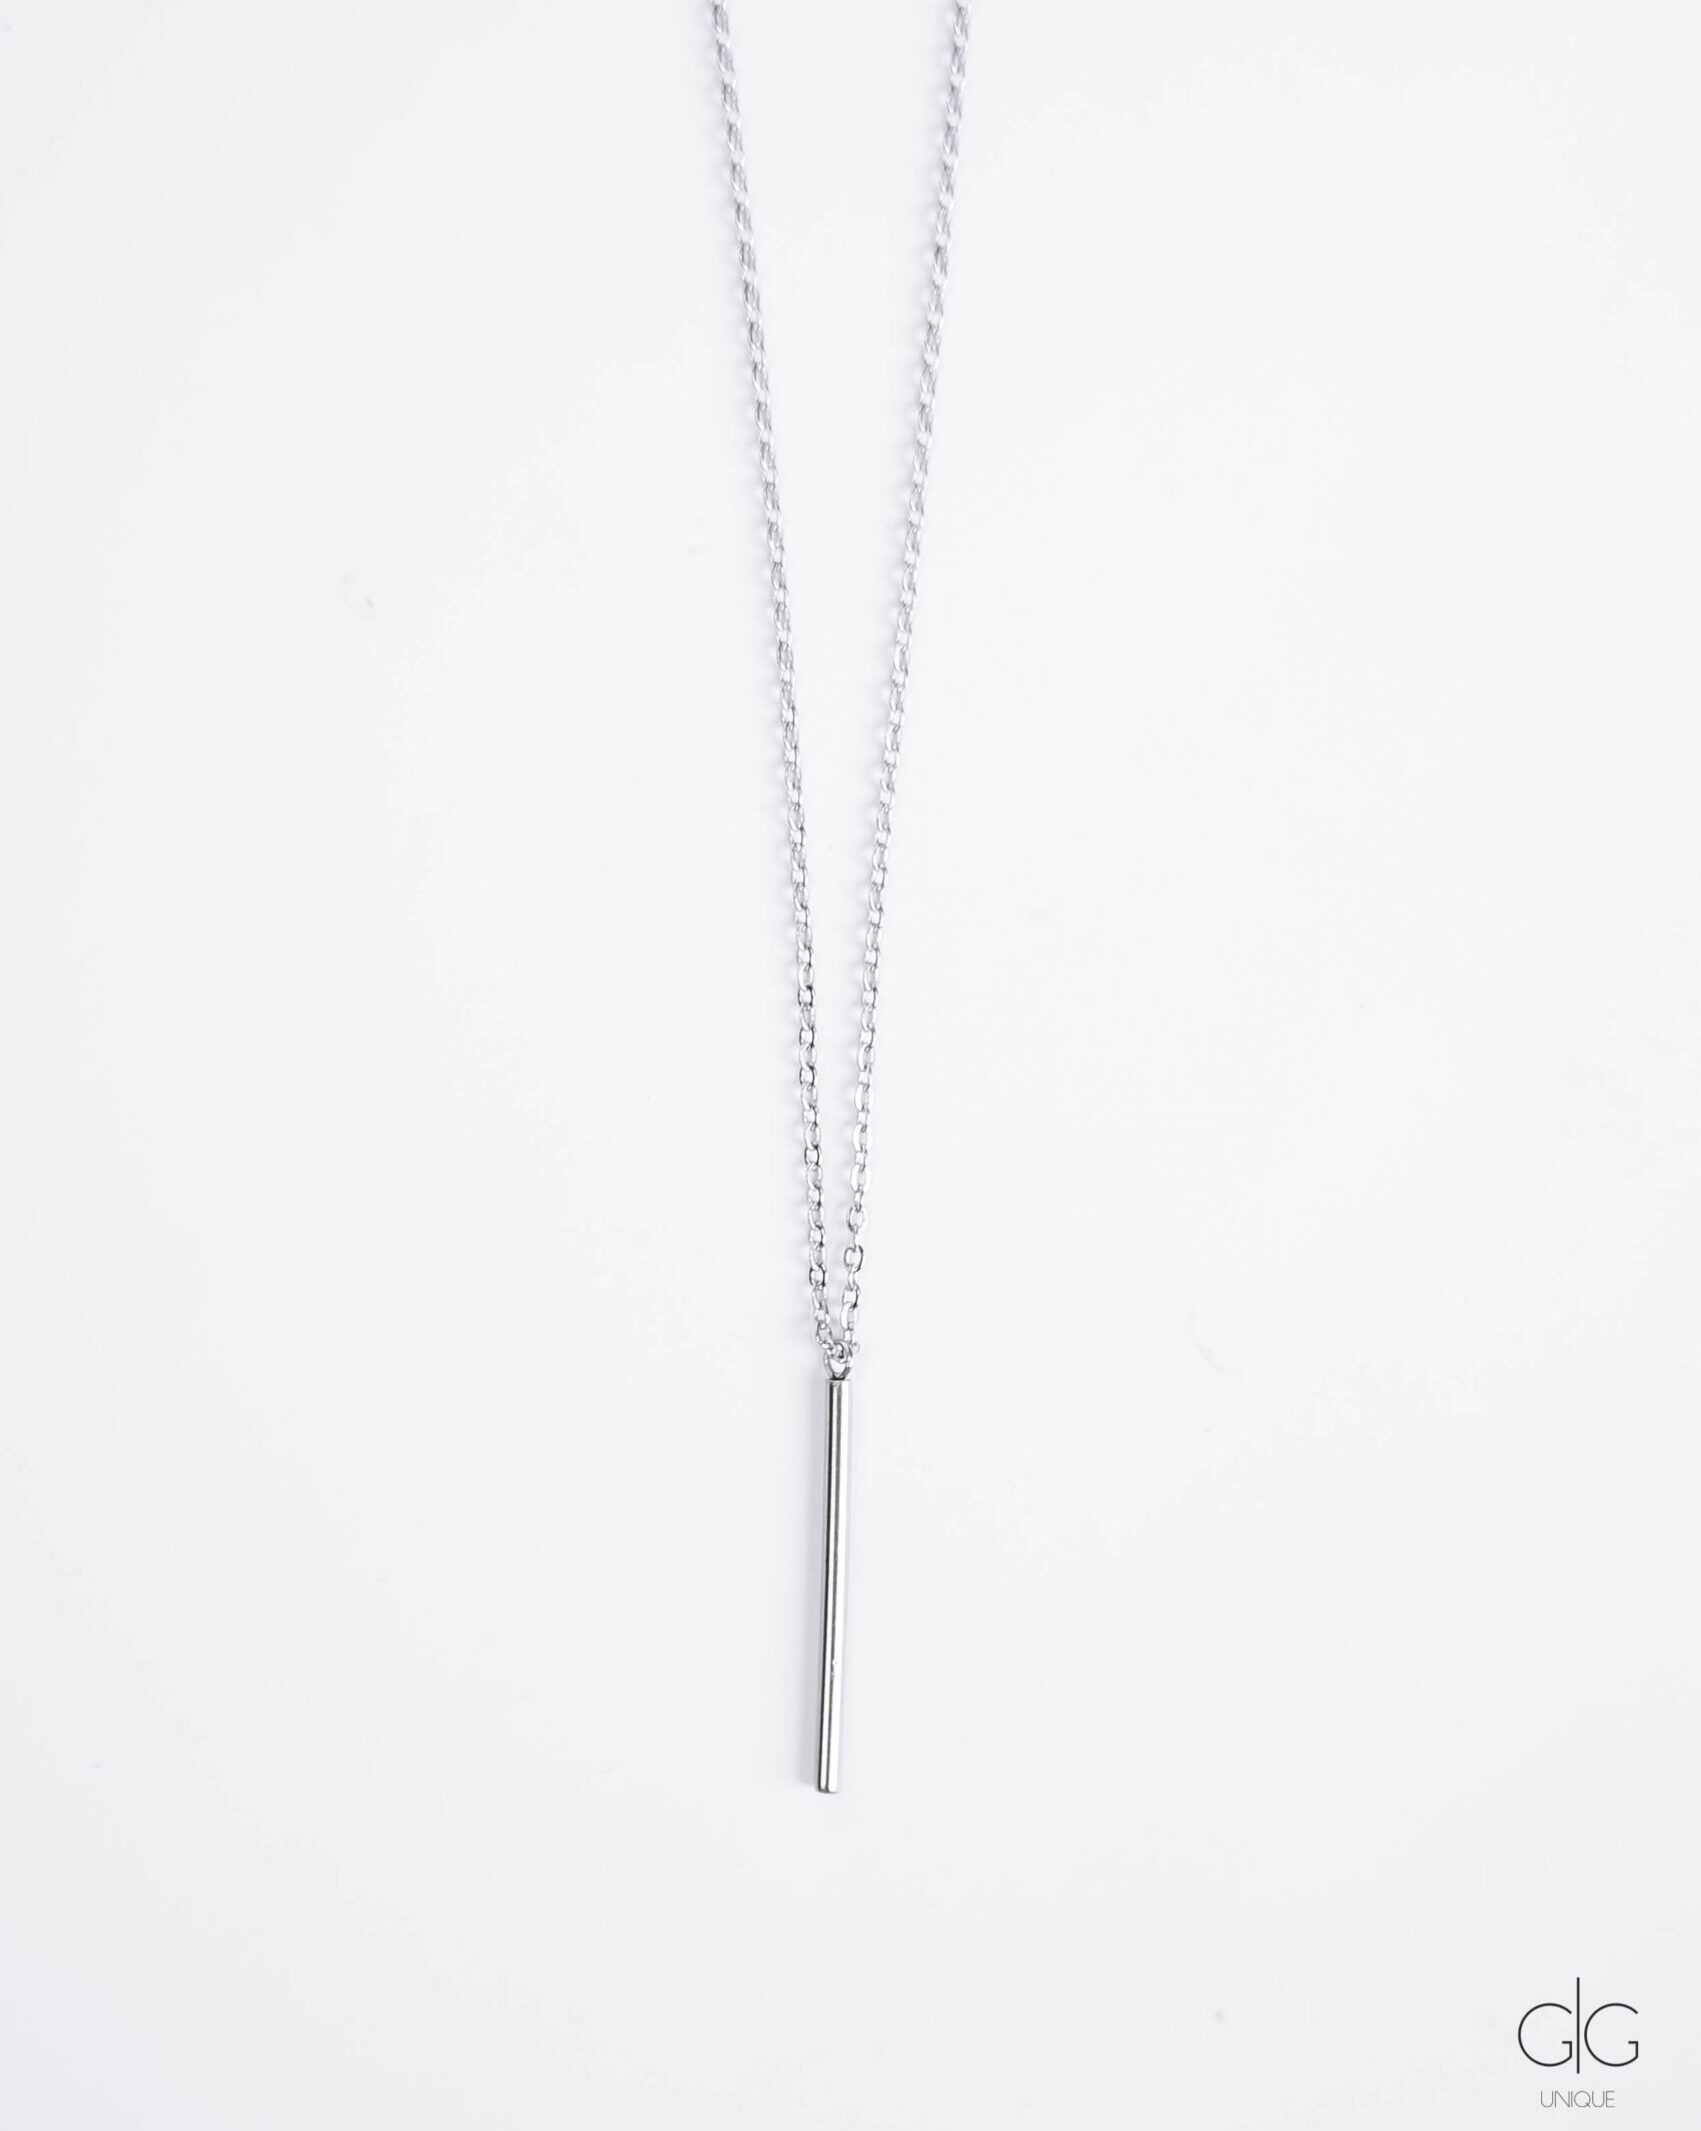 Unisex long chain necklace in silver